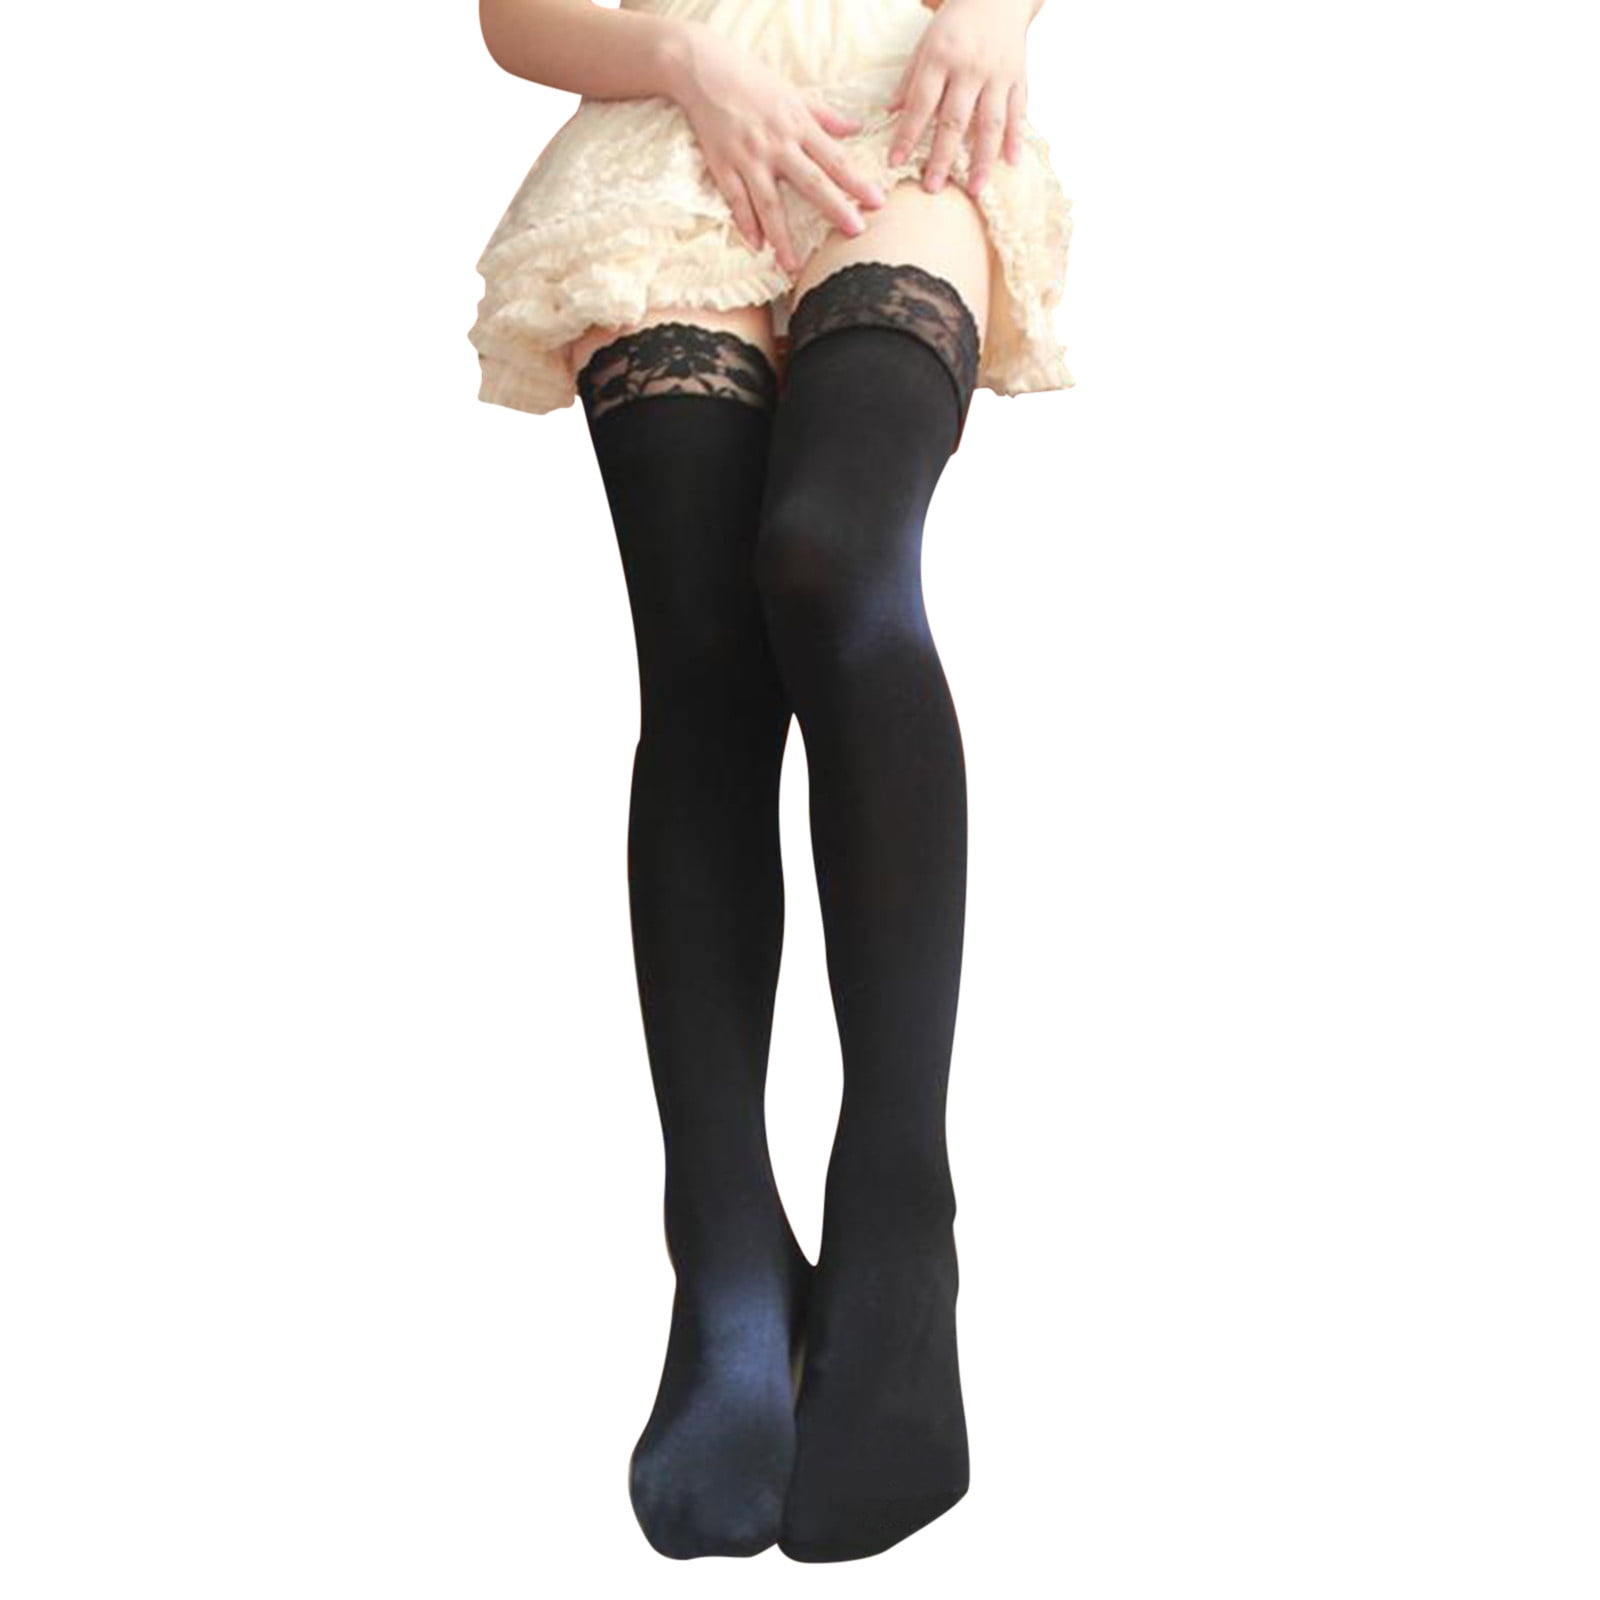 Socks For Women Lace Over Knee Stockings Solid Lace Lace Stockings -  Walmart.com